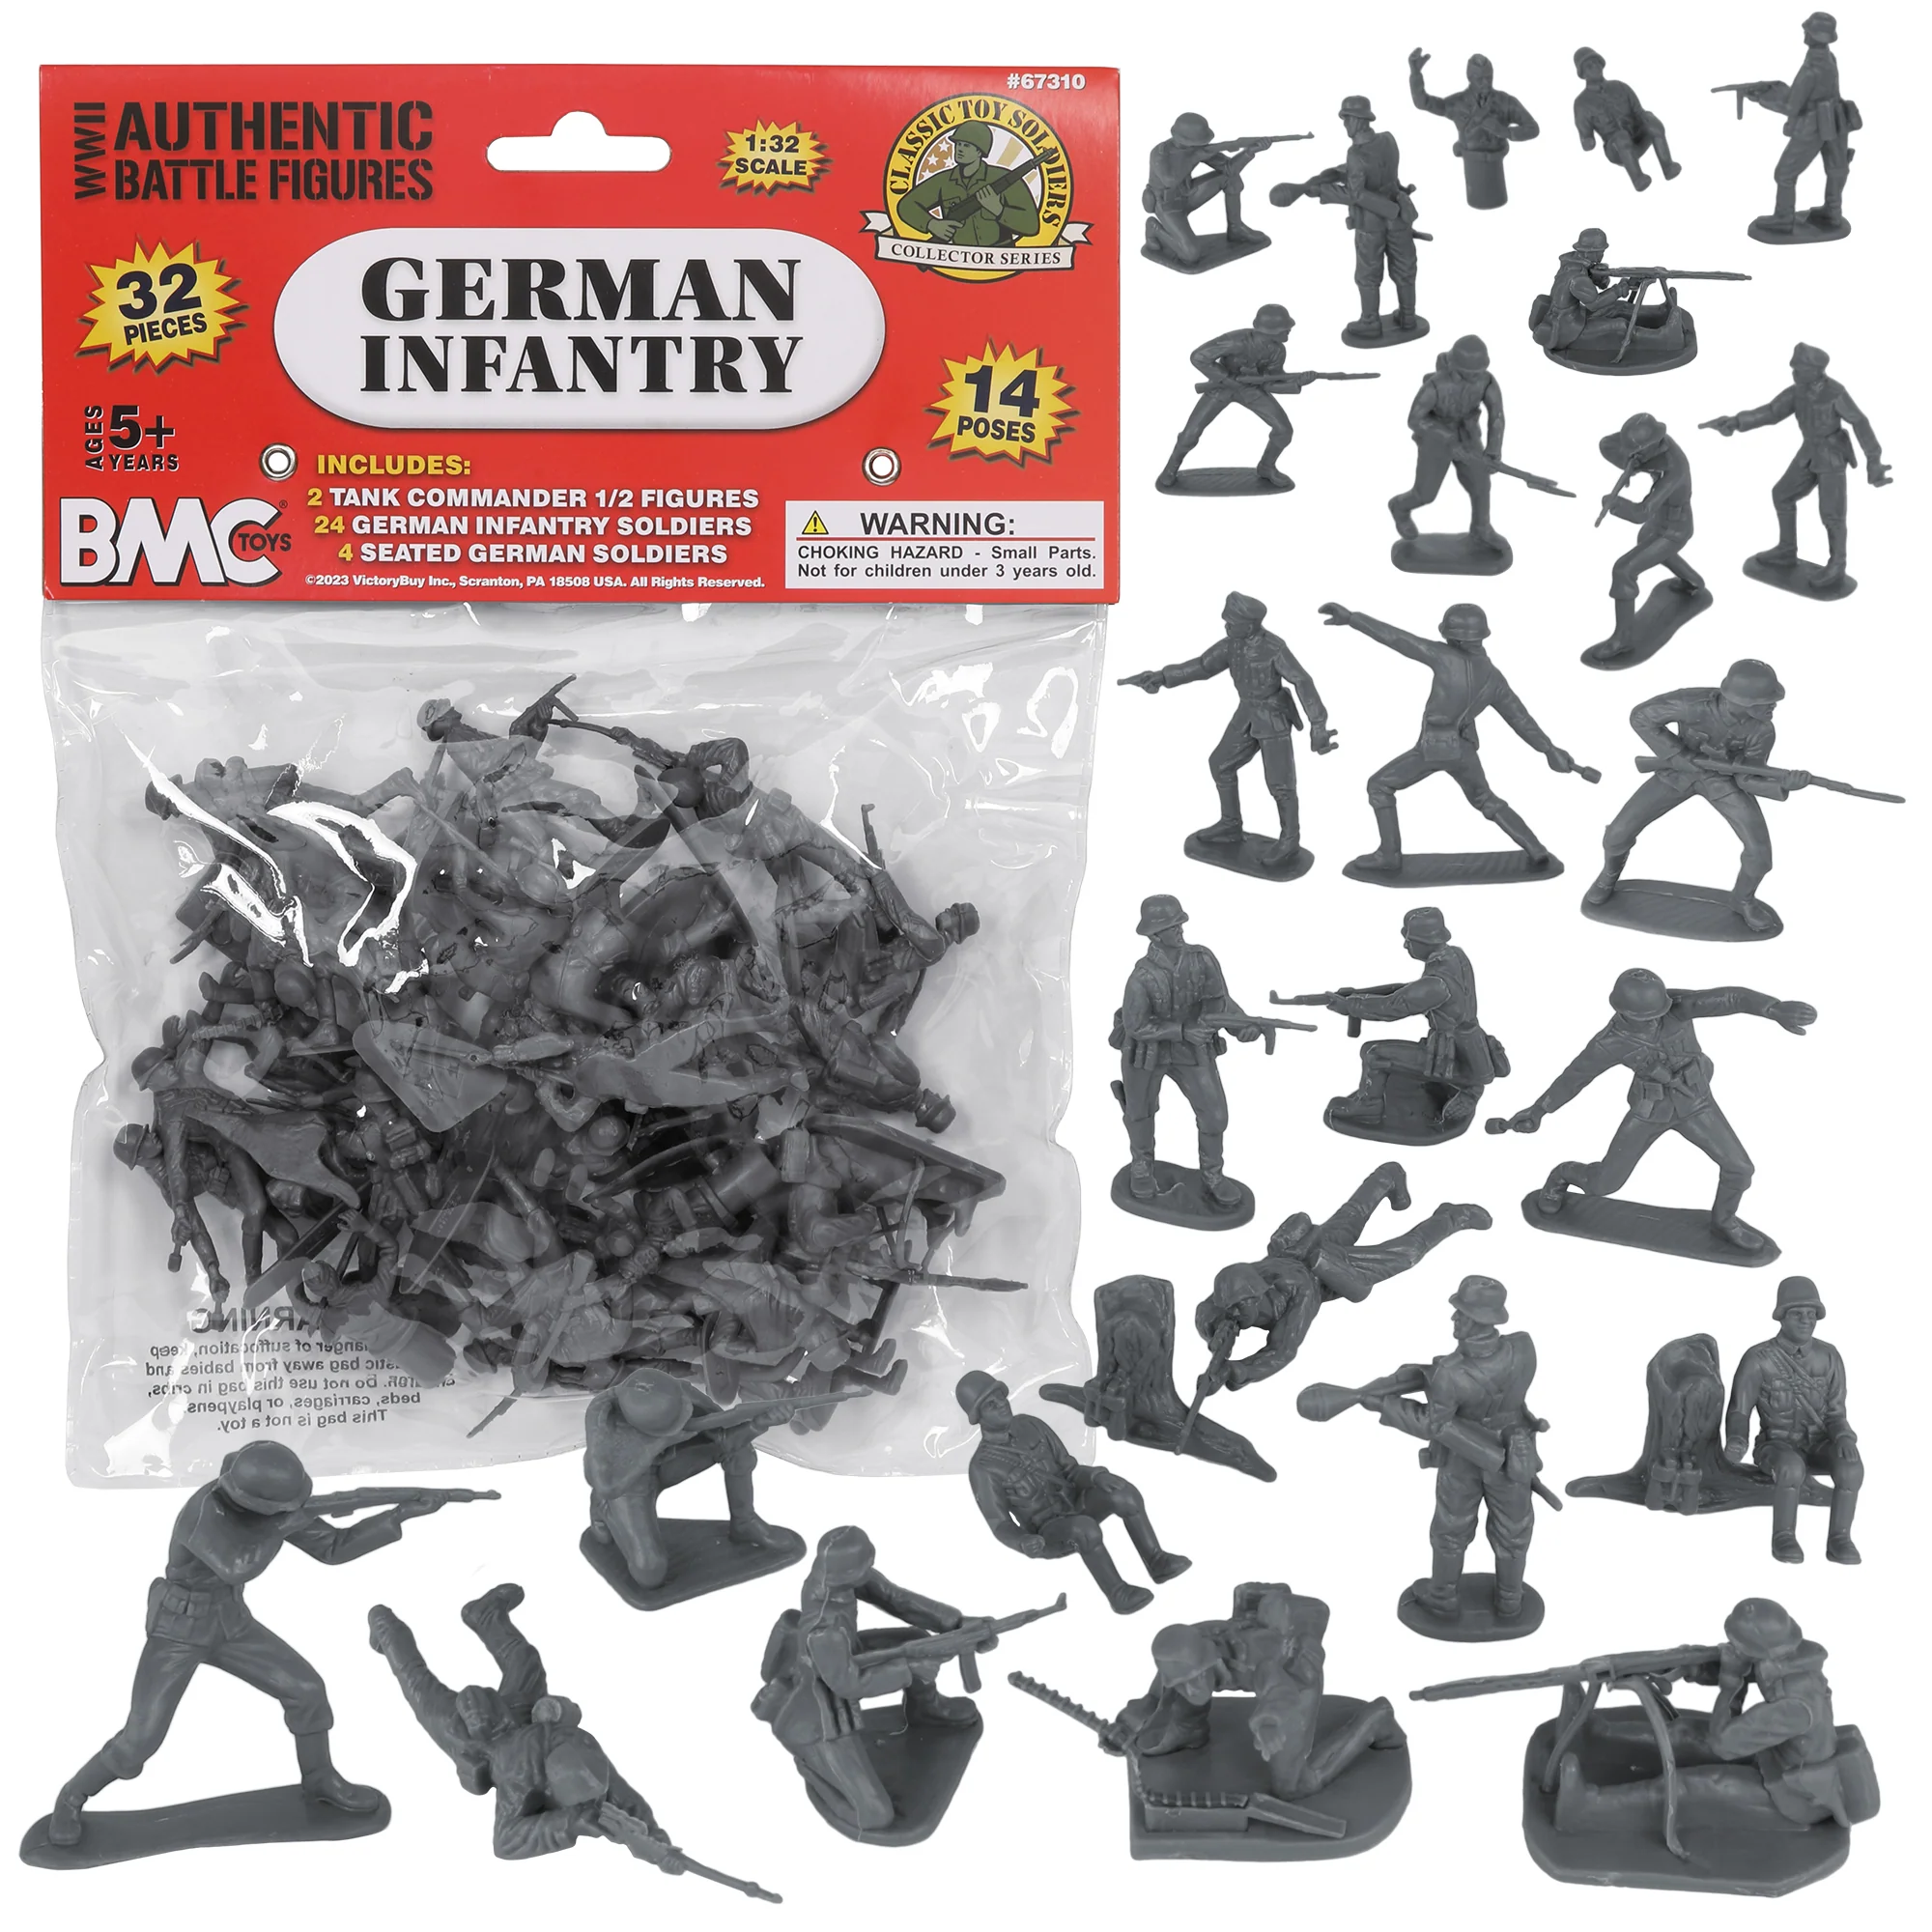 BMC Toys WWII German Infantry Soldiers Set 67310